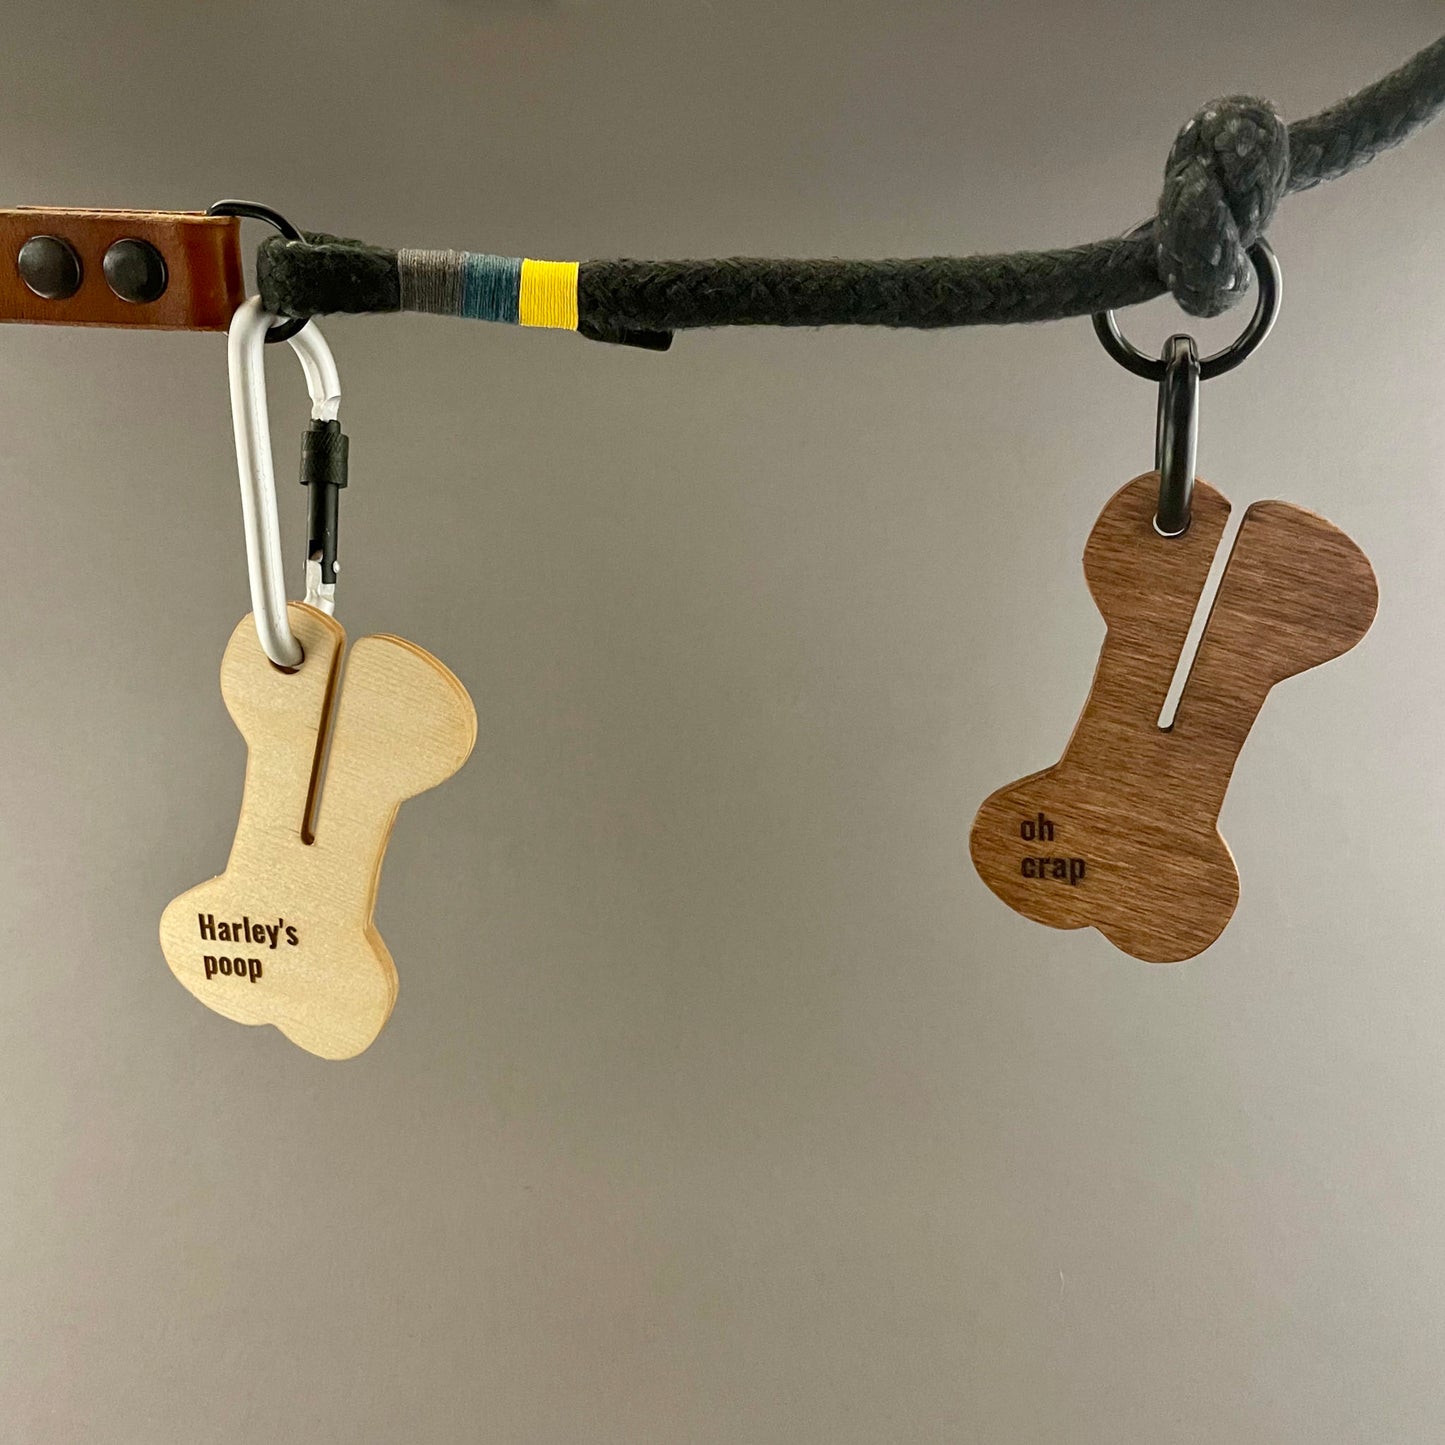 Dog waste bag holders attached to leash